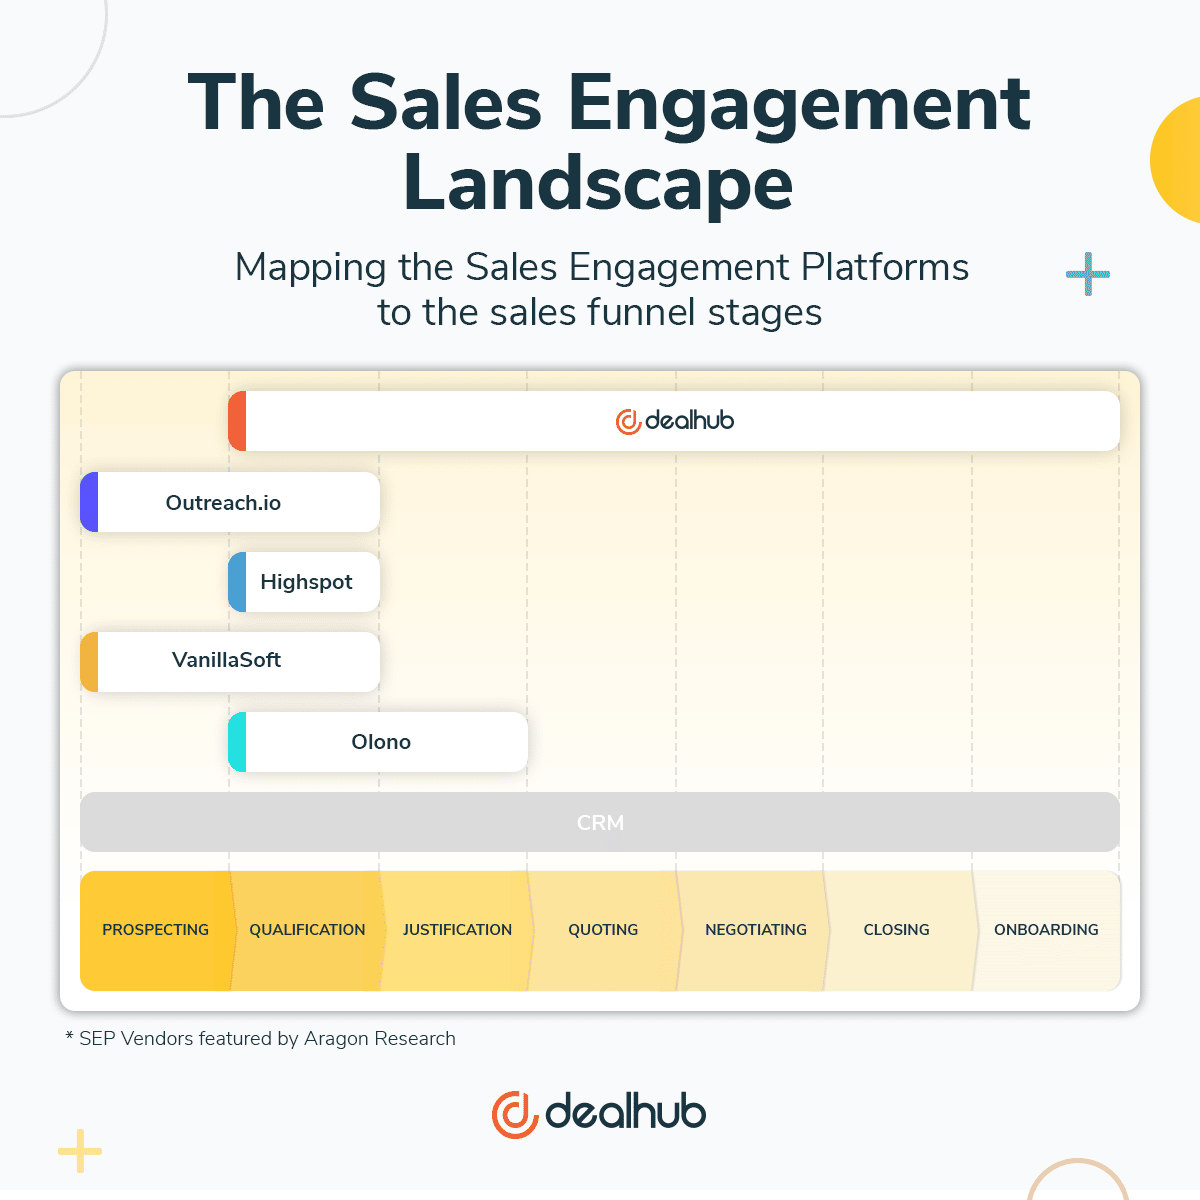 sales engagement platforms mapping